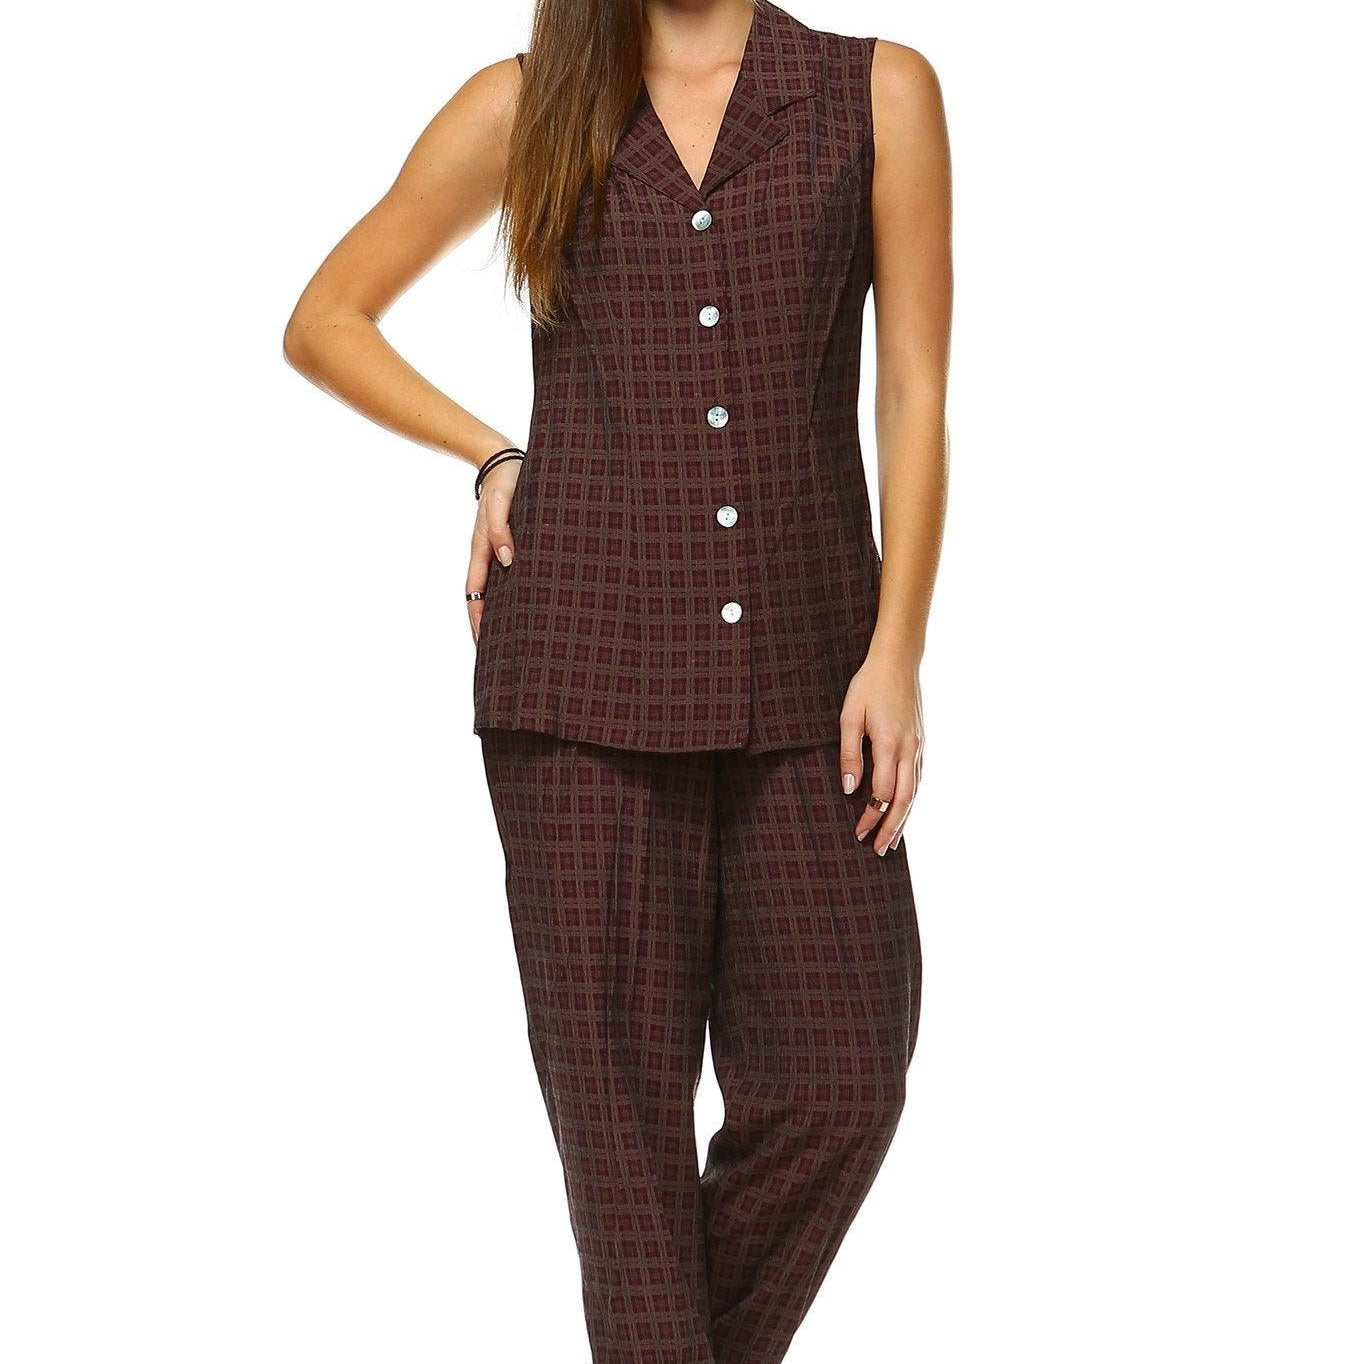 Women's Outfits & Sets Women's Workwear 2 Piece Outfit Set